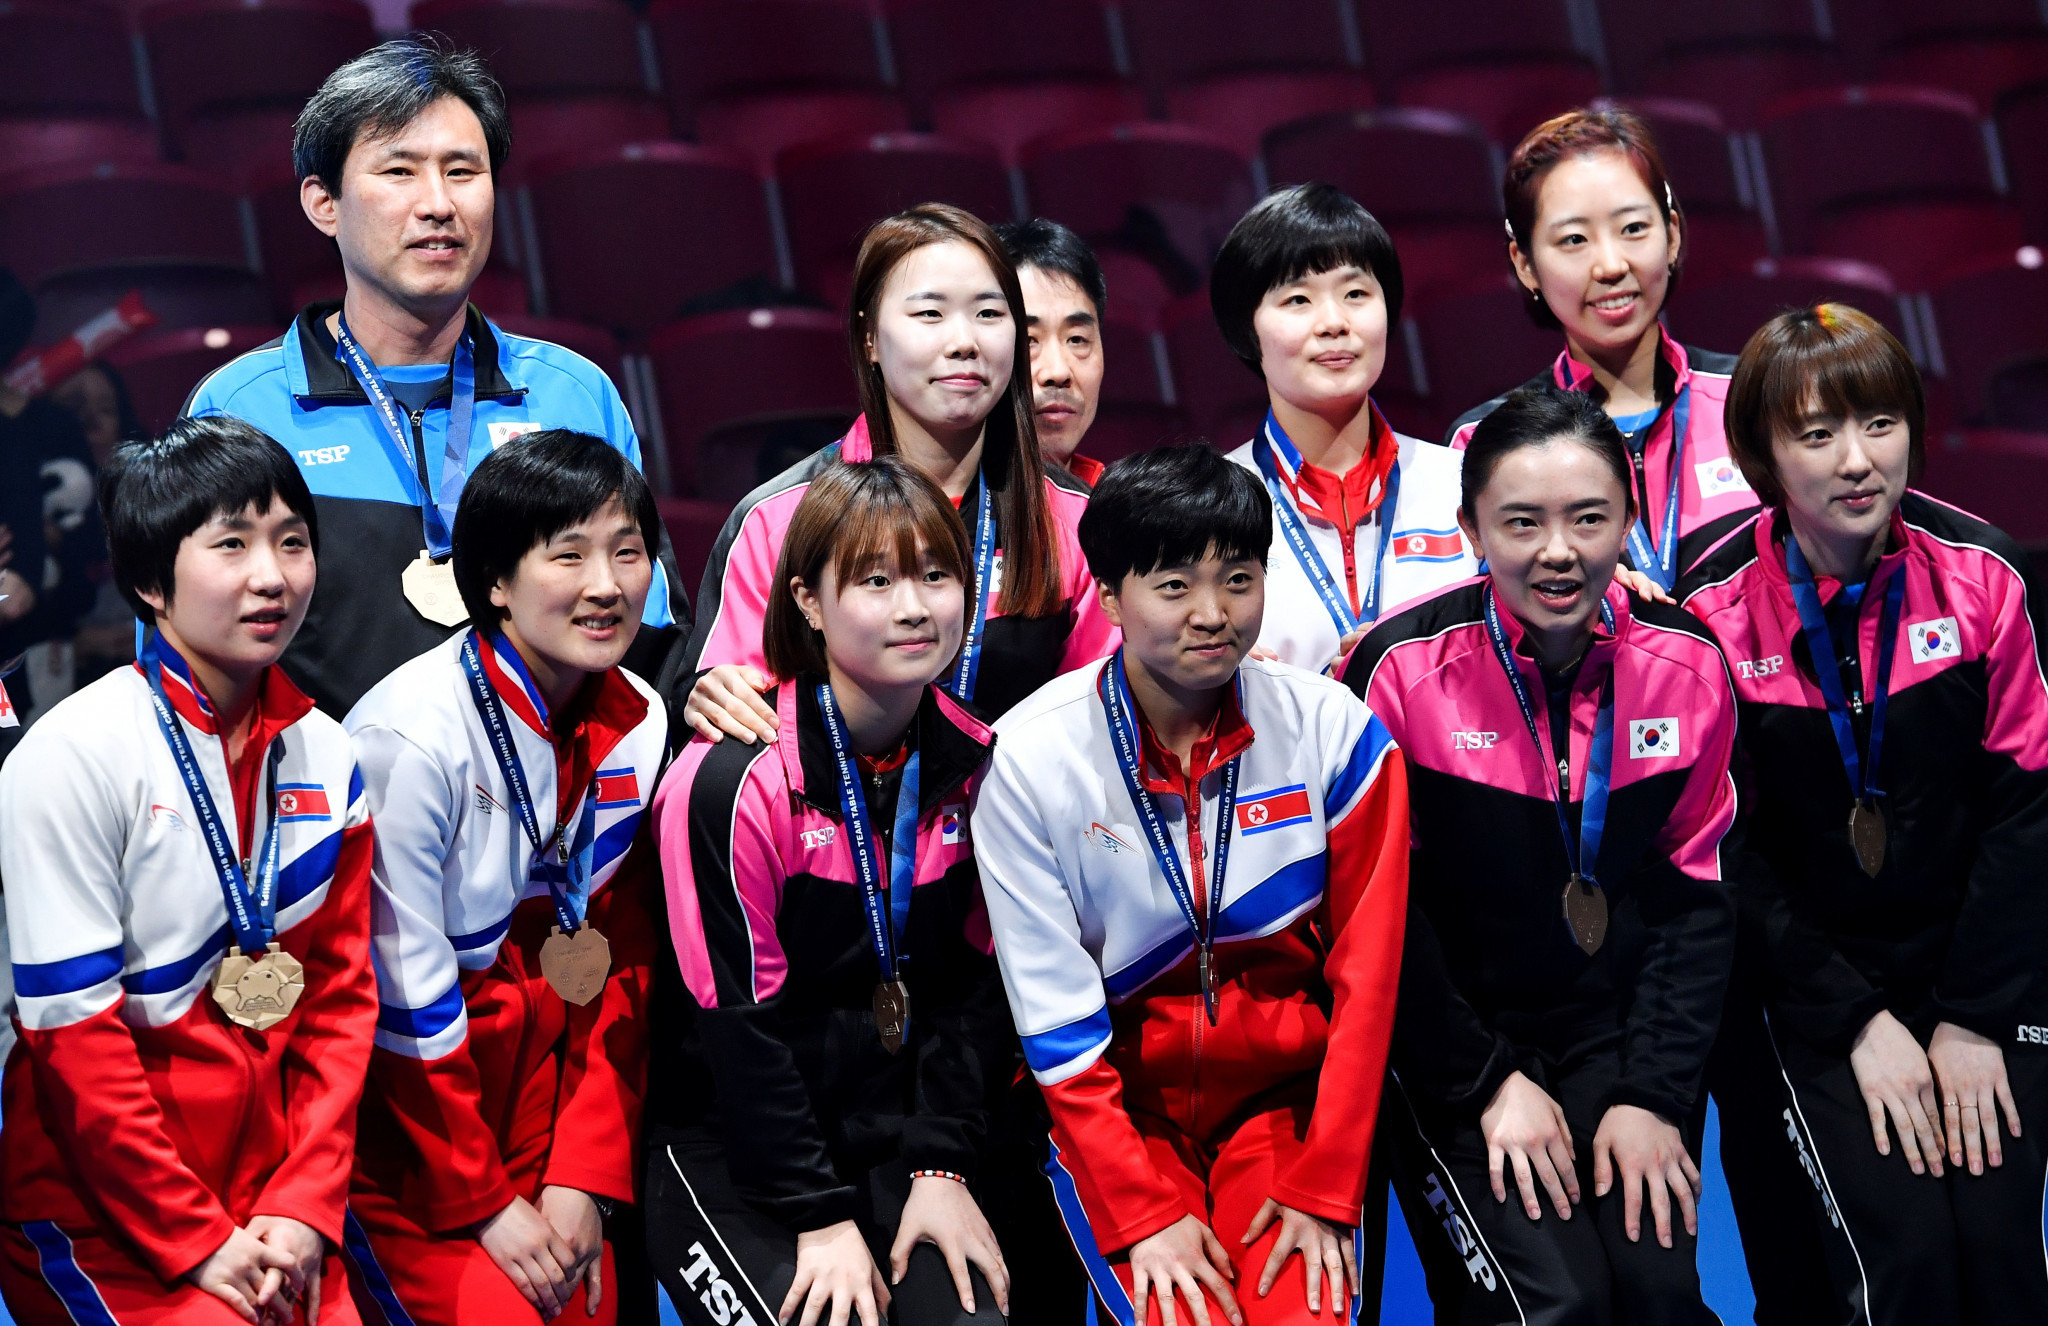 South Korean men's table tennis coach Kim Taek-soo expressed his hope that a unified Korean team will compete at this year's Asian Games in Jakarta and Palembang ©Getty Images